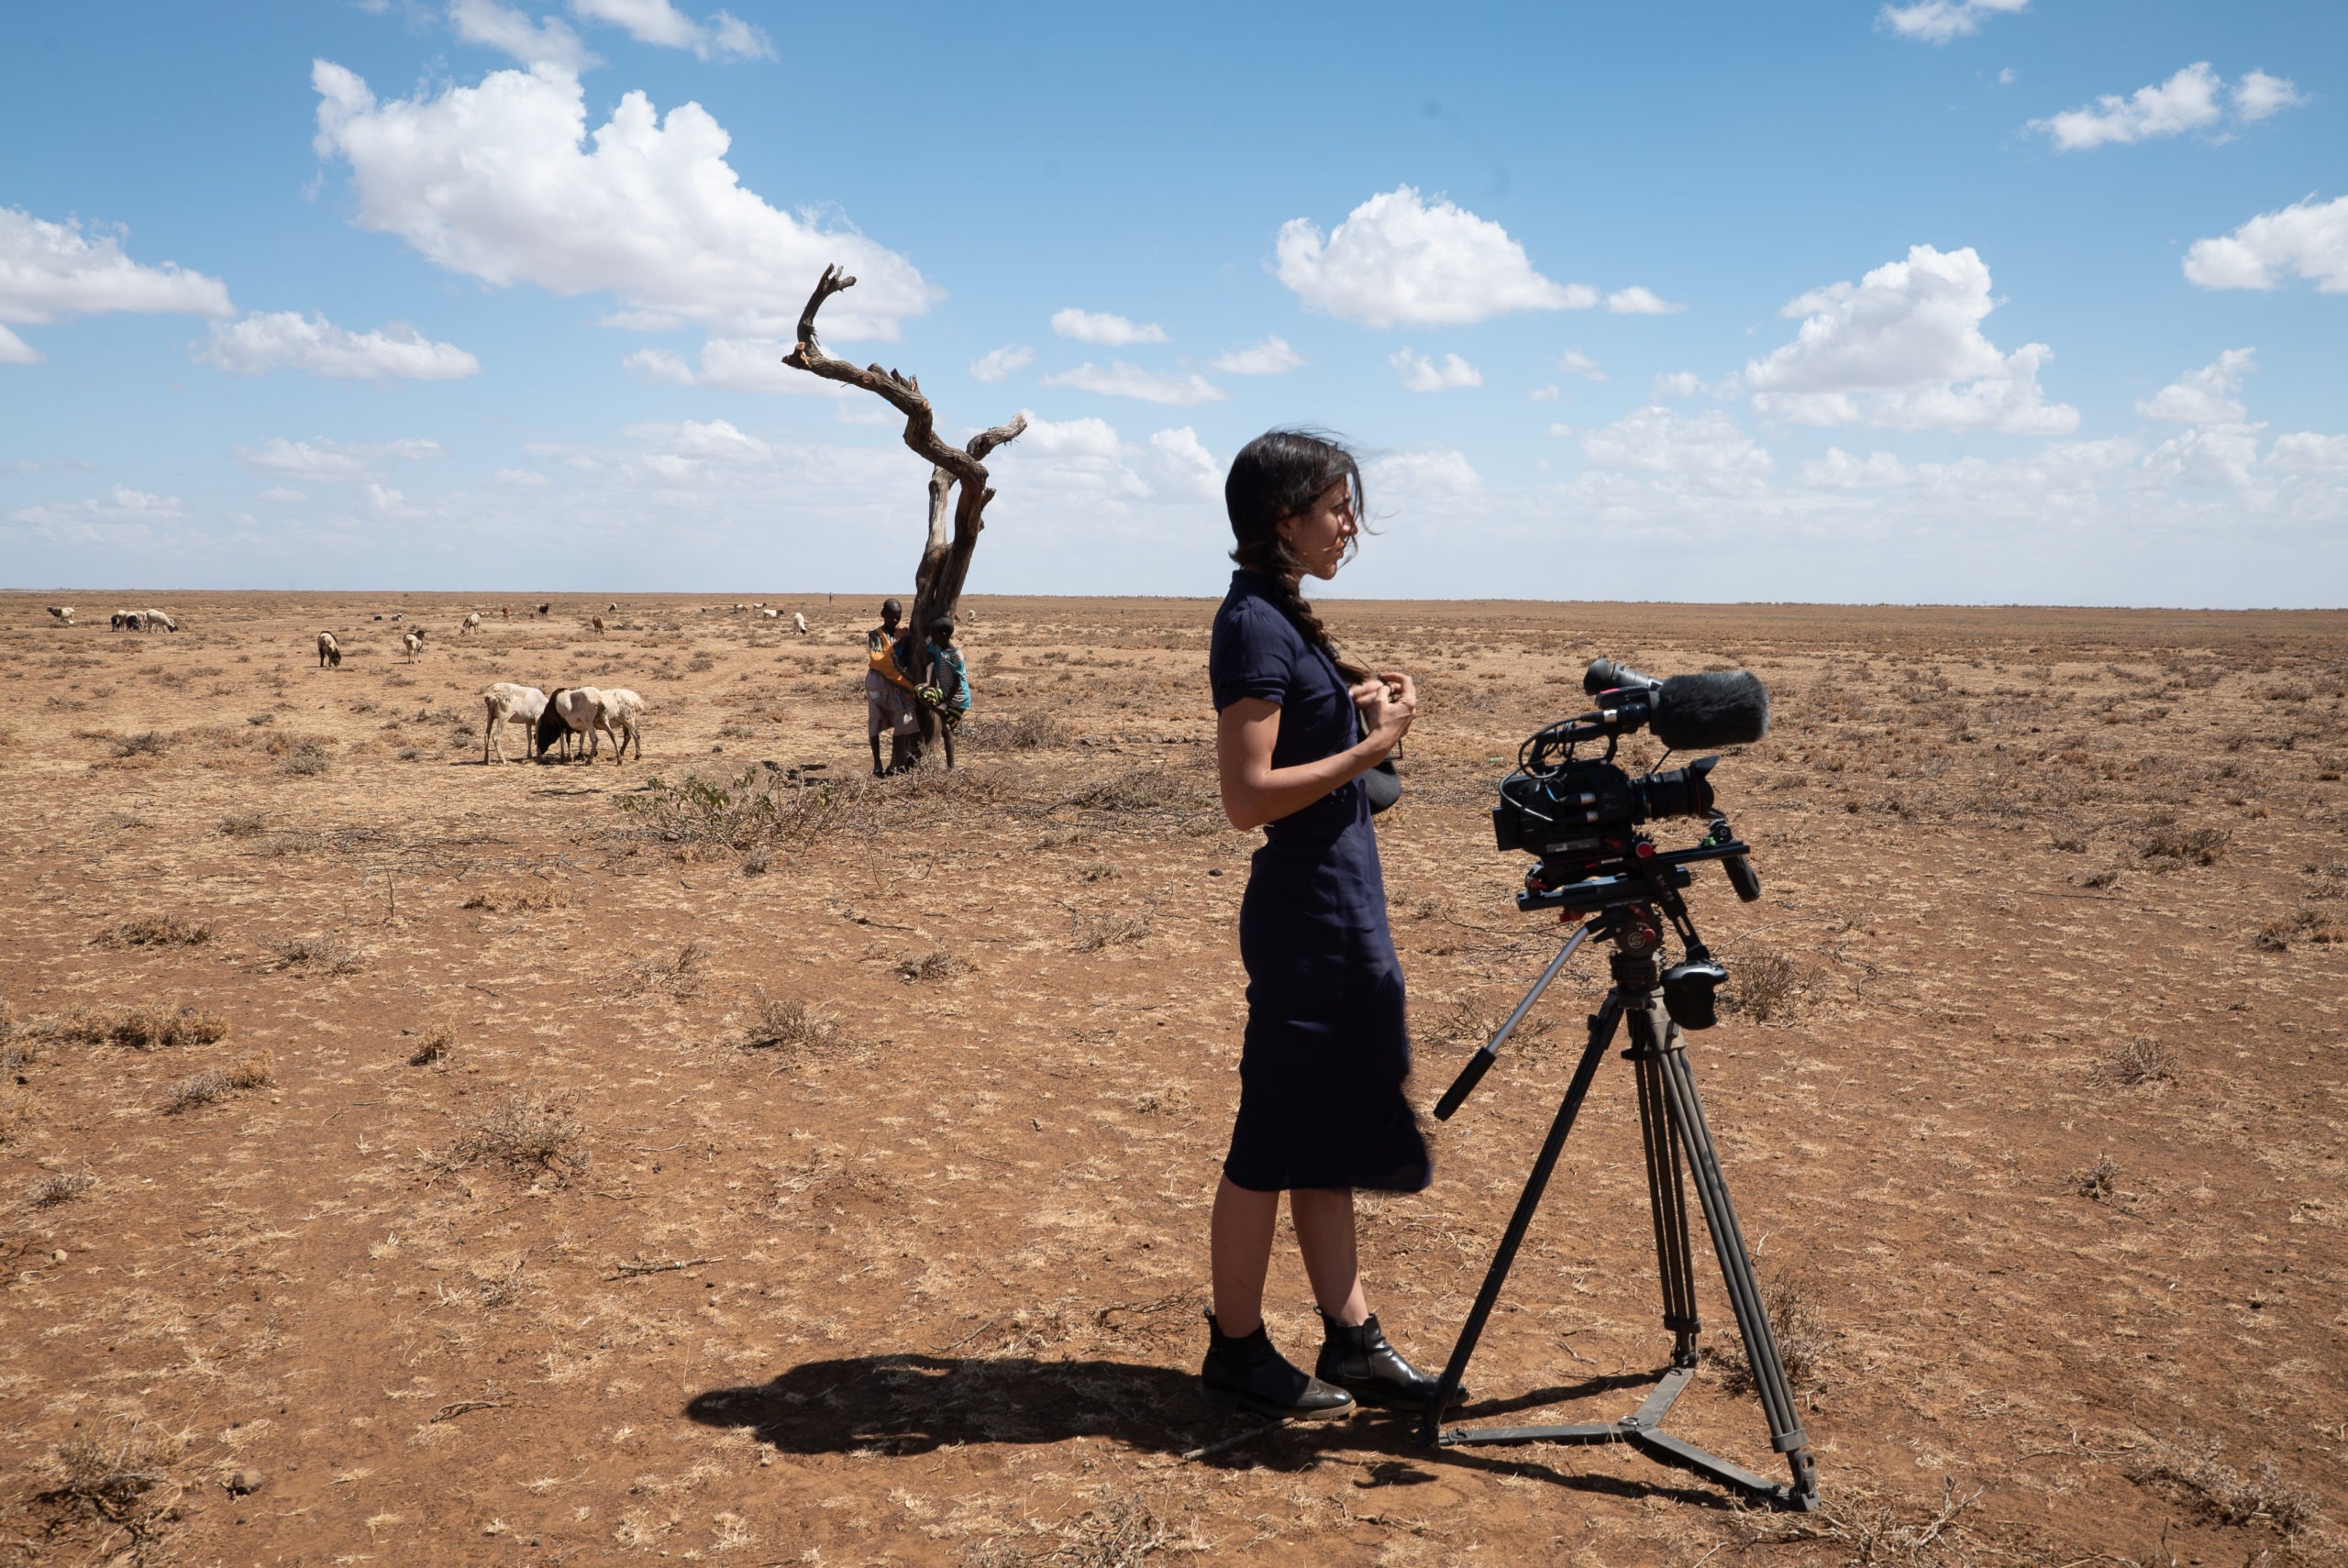 A woman stands beside a video camera on a tripod in an arid, open landscape with a few sparse clouds in the sky. In the background, a leafless tree stands and a person tends to a small herd of goats. The dry, barren terrain serves as an evocative backdrop for this Berkeley Journalism project.